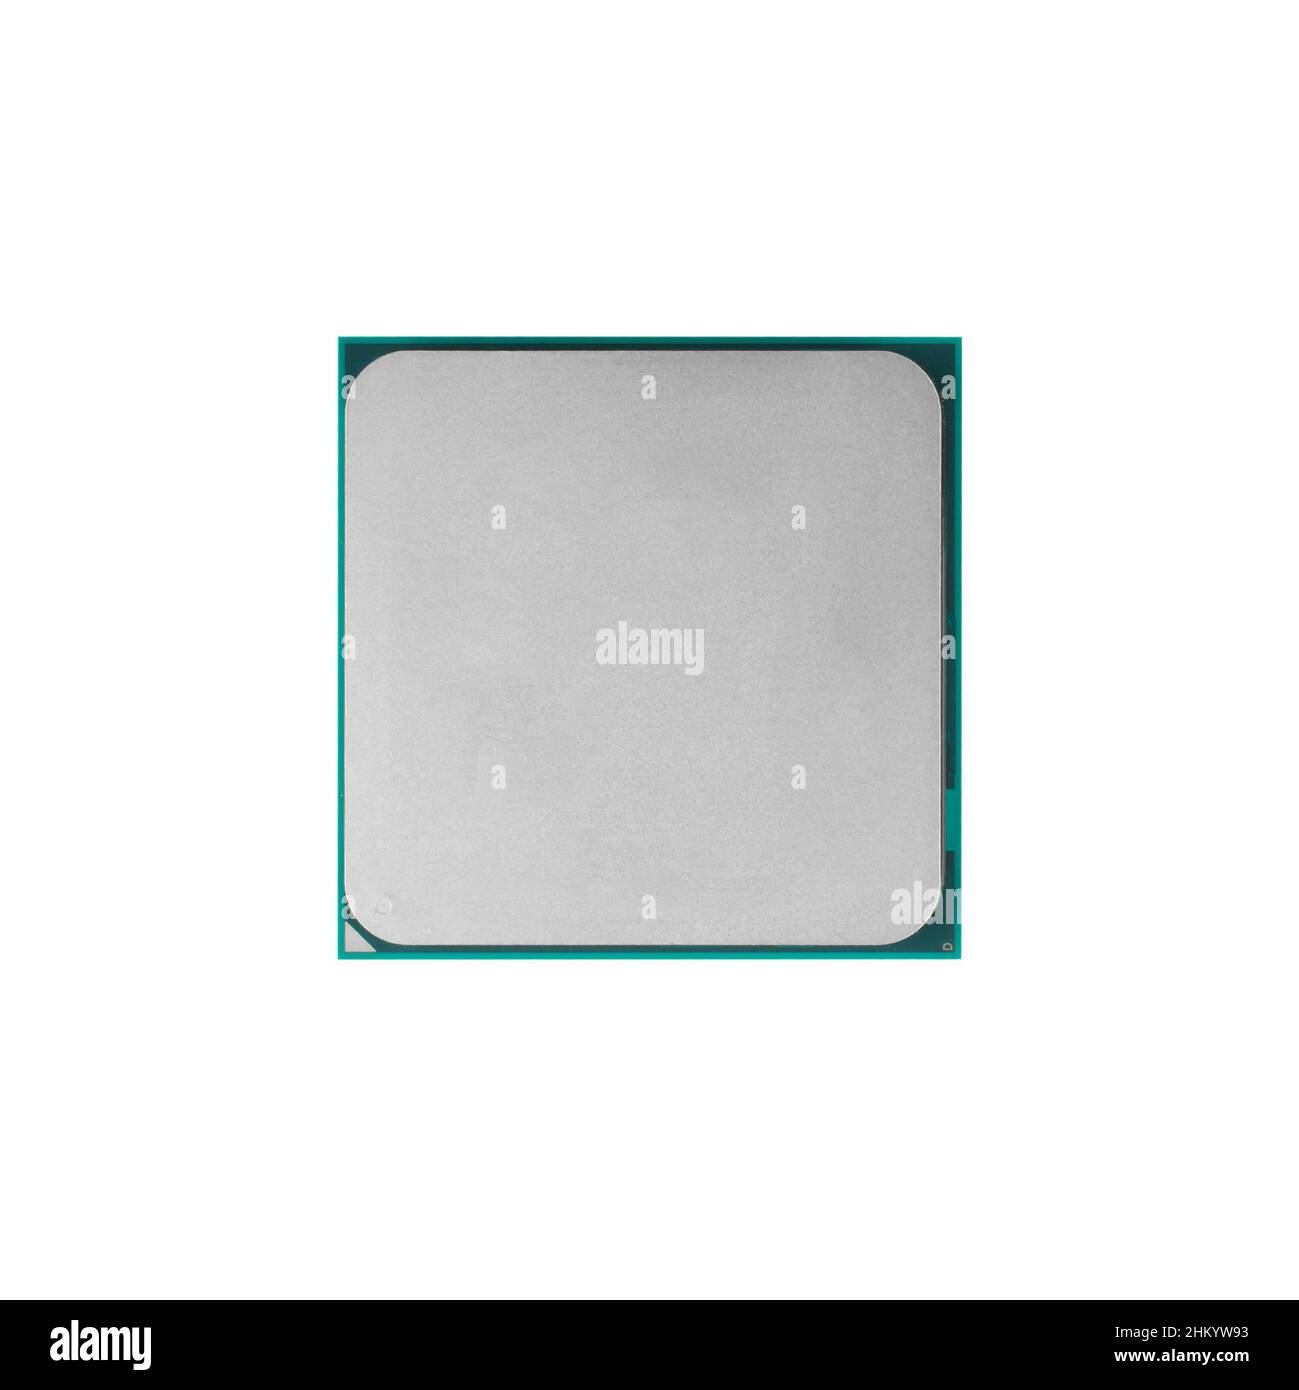 processor for a computer, a spare part for a computer, on a white background, in isolation Stock Photo